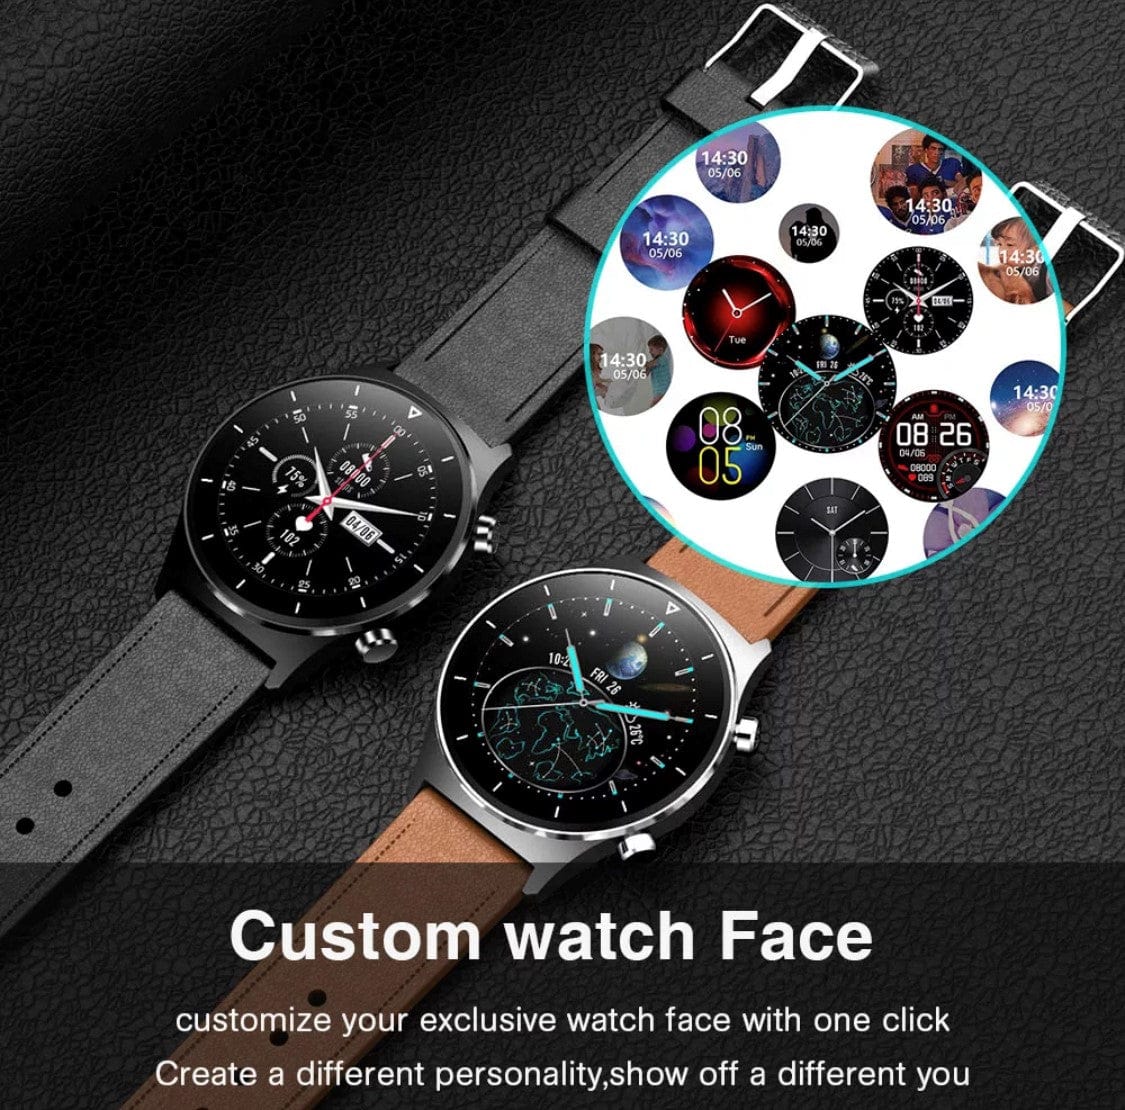 Smart Watch South Africa Watches Black Leather & Black Silicone Strap SMARTOBY Pro  Men Smartwatch Black  Leather & Black Silicone